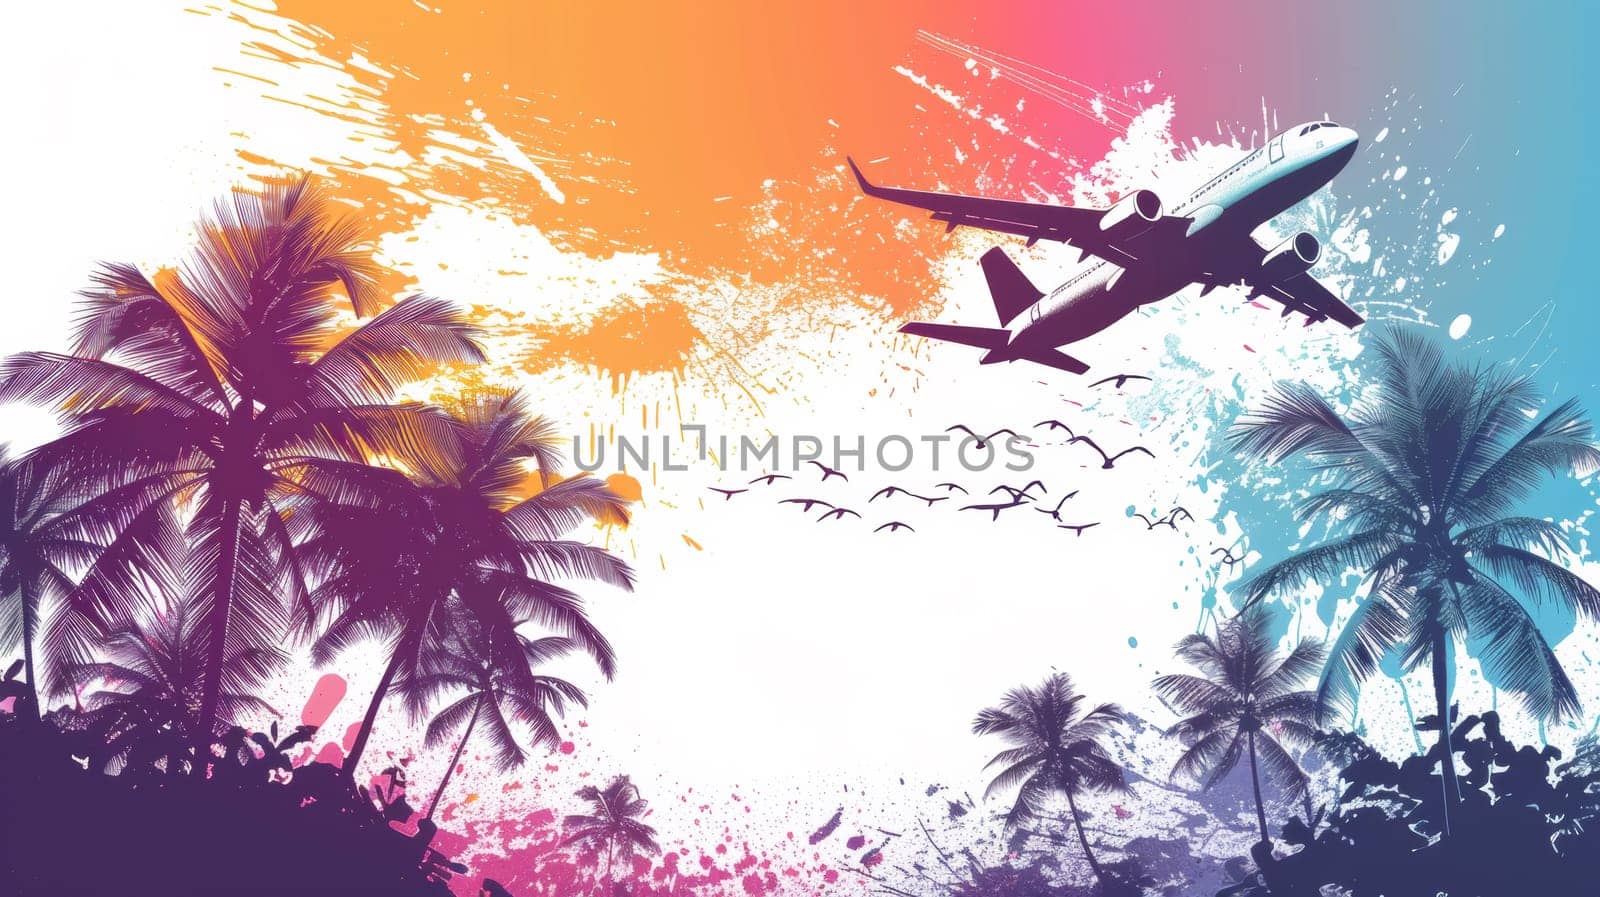 A colorful painting of an airplane flying over palm trees, AI by starush